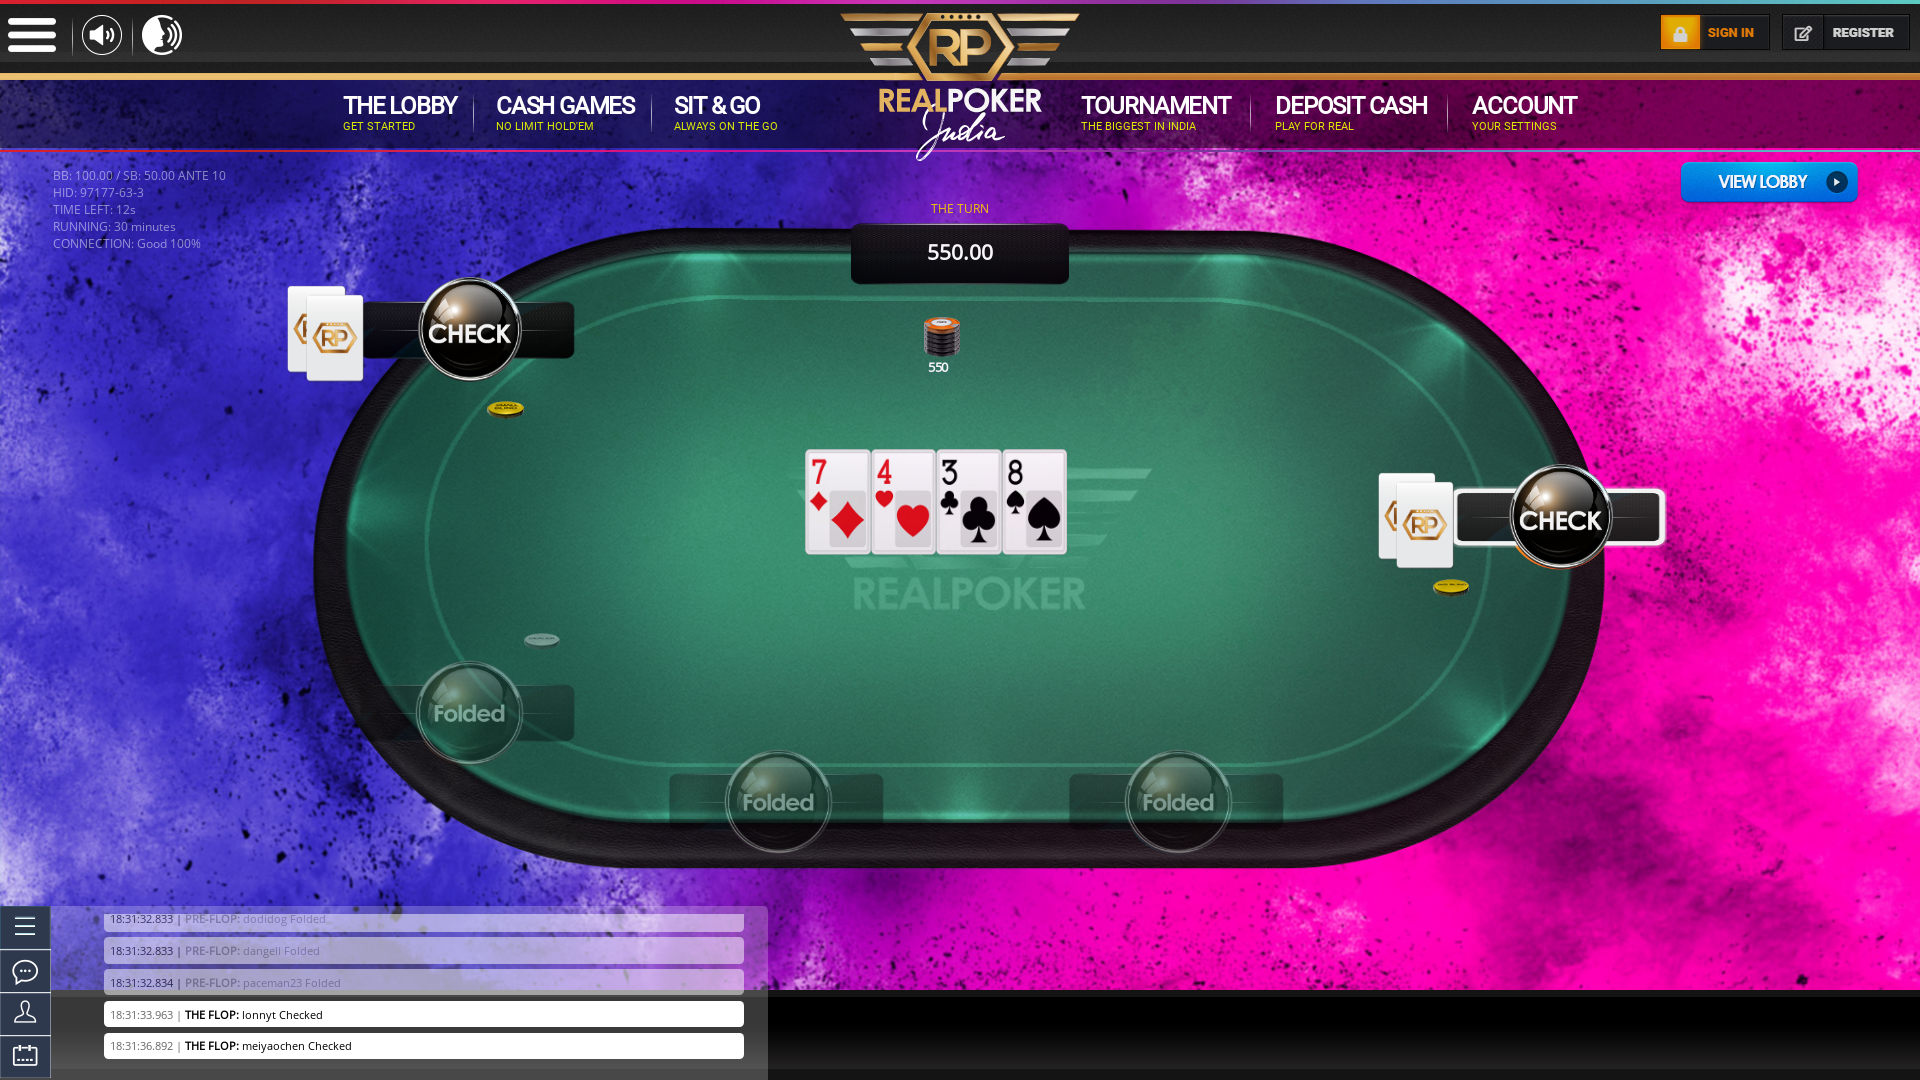 Indian poker on a 10 player table in the 30th minute